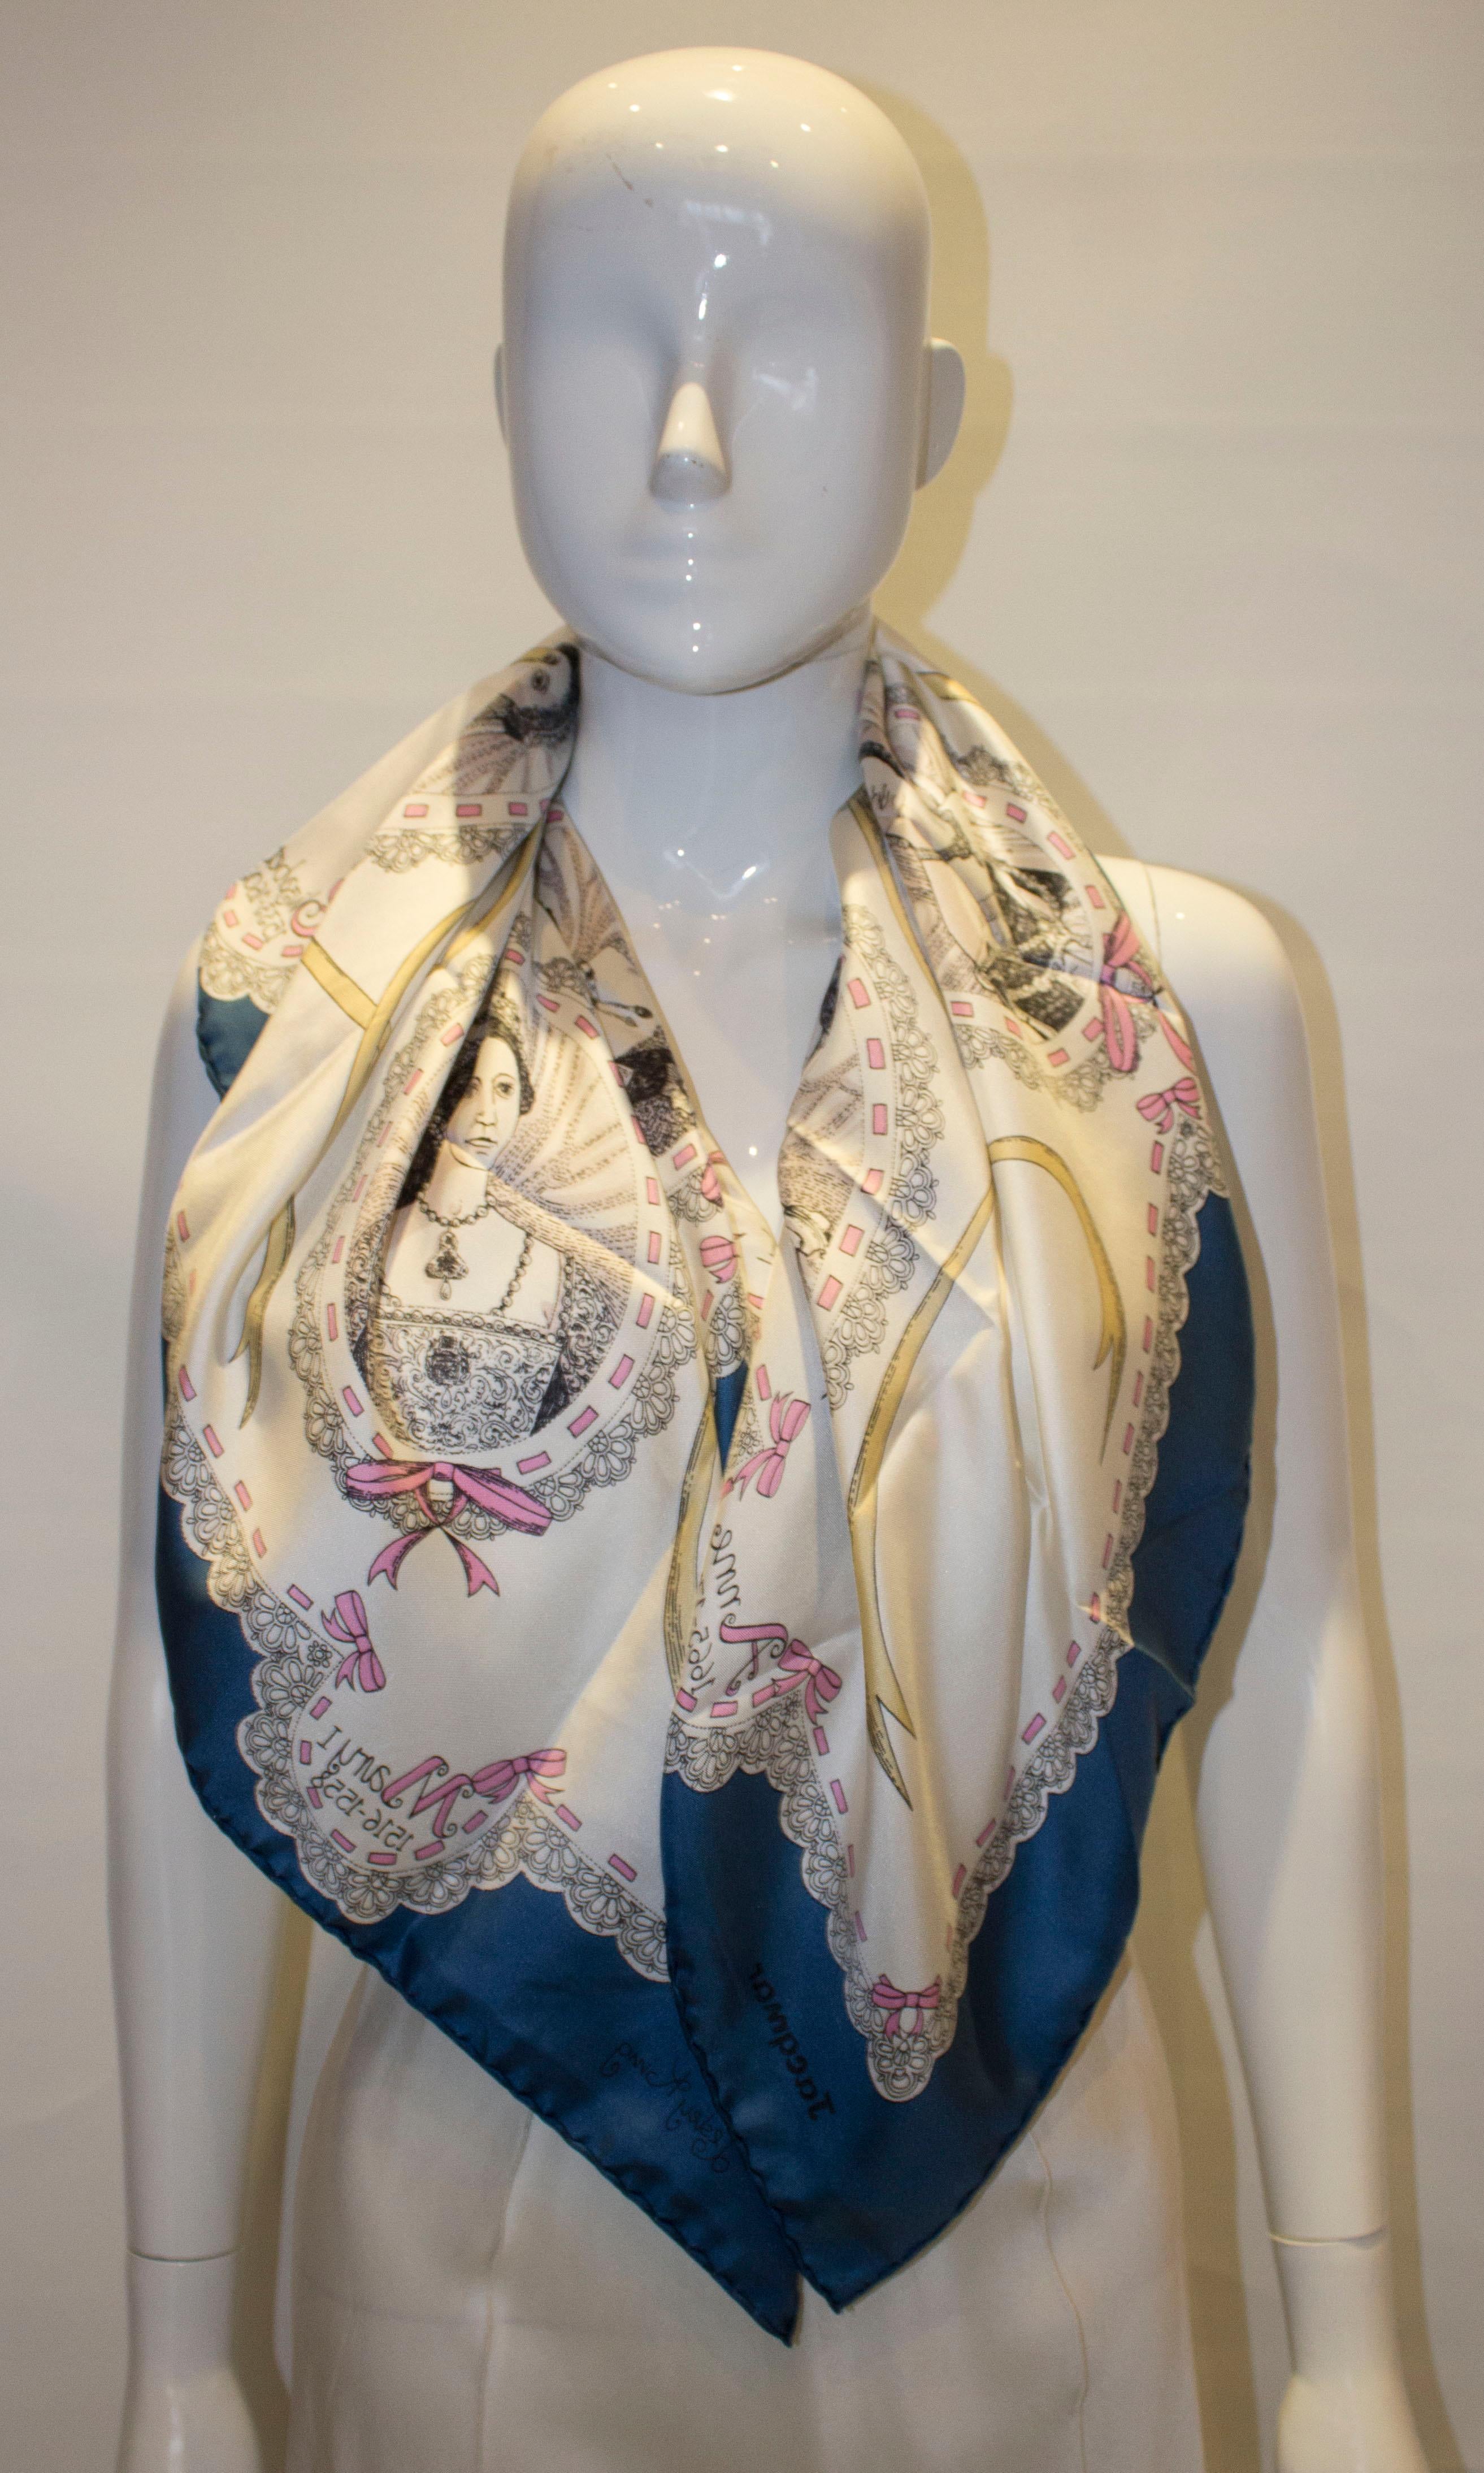 A fun vintage silk scarf by Jacqumar. The scarf has a design showing various British Queens , and has a blue hand rolled border. Measurements: 34'' square.